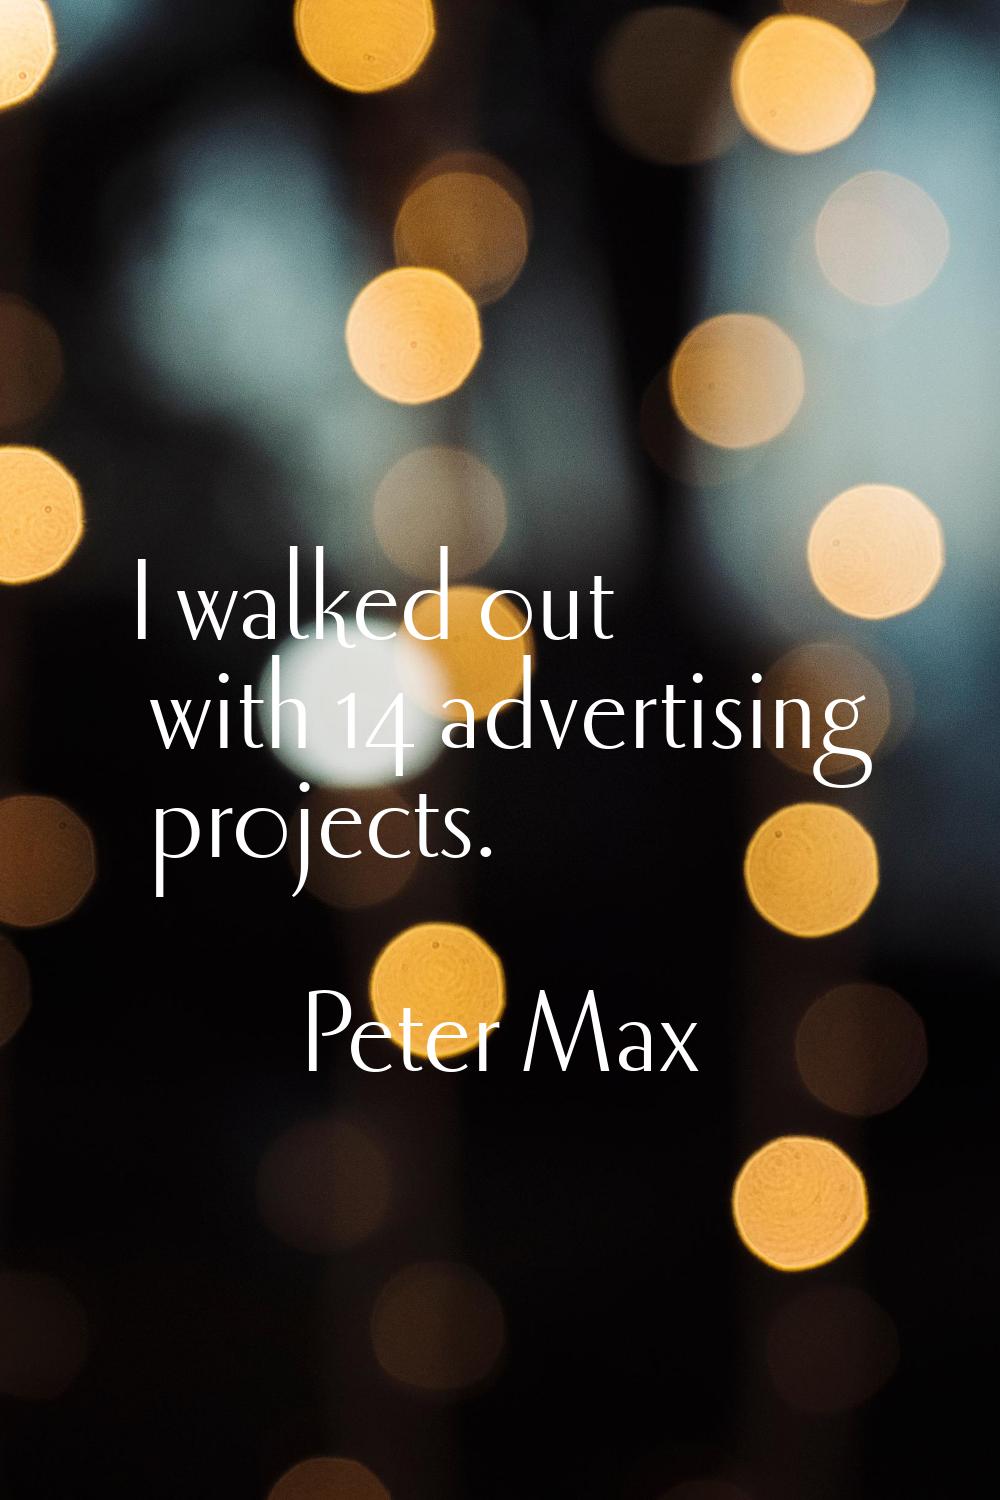 I walked out with 14 advertising projects.